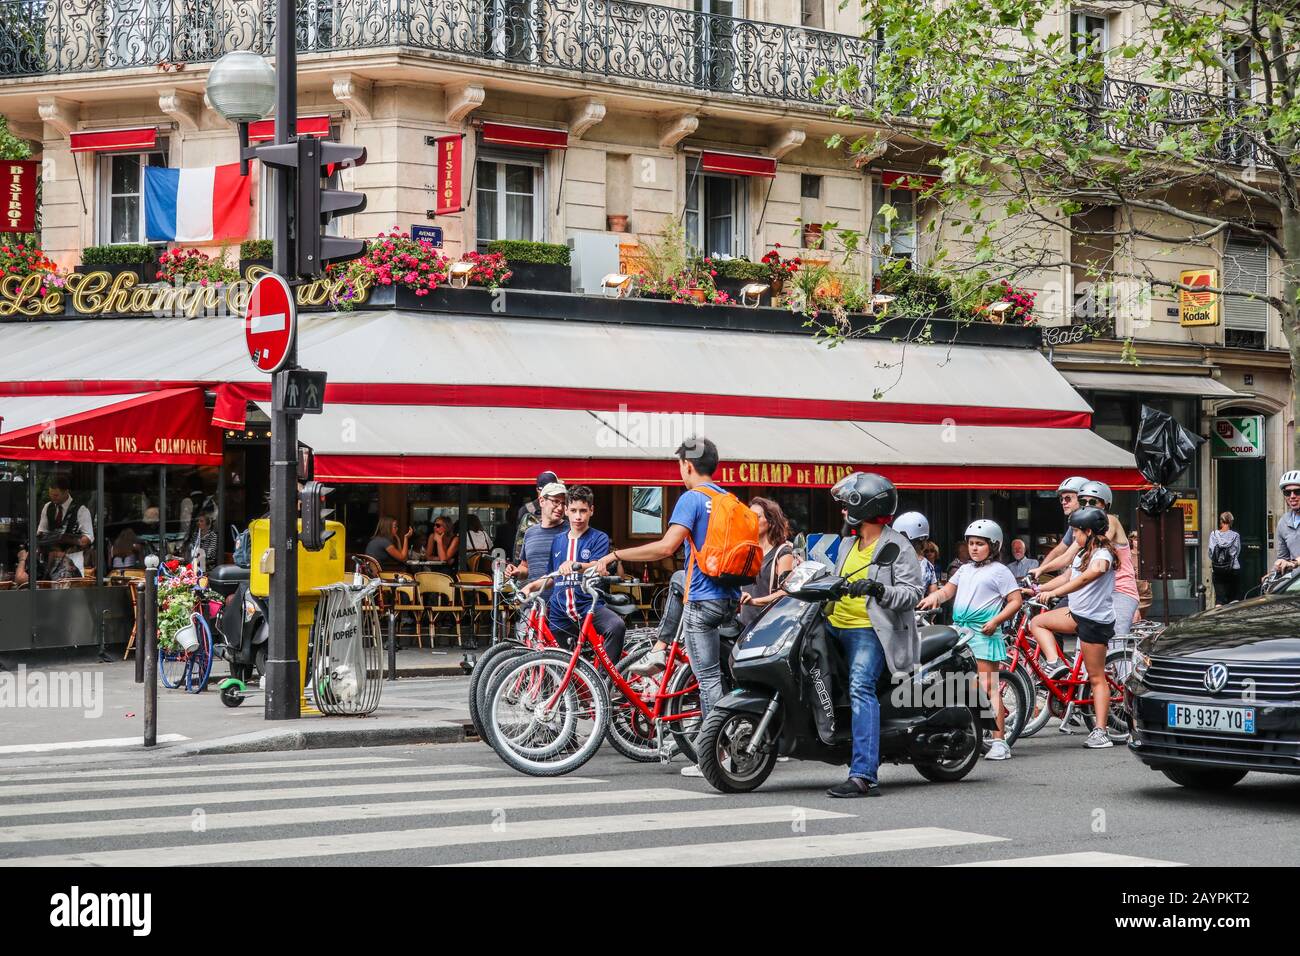 Moped rider and cyclists waiting at zebra crossing in Paris, France, Europe Stock Photo